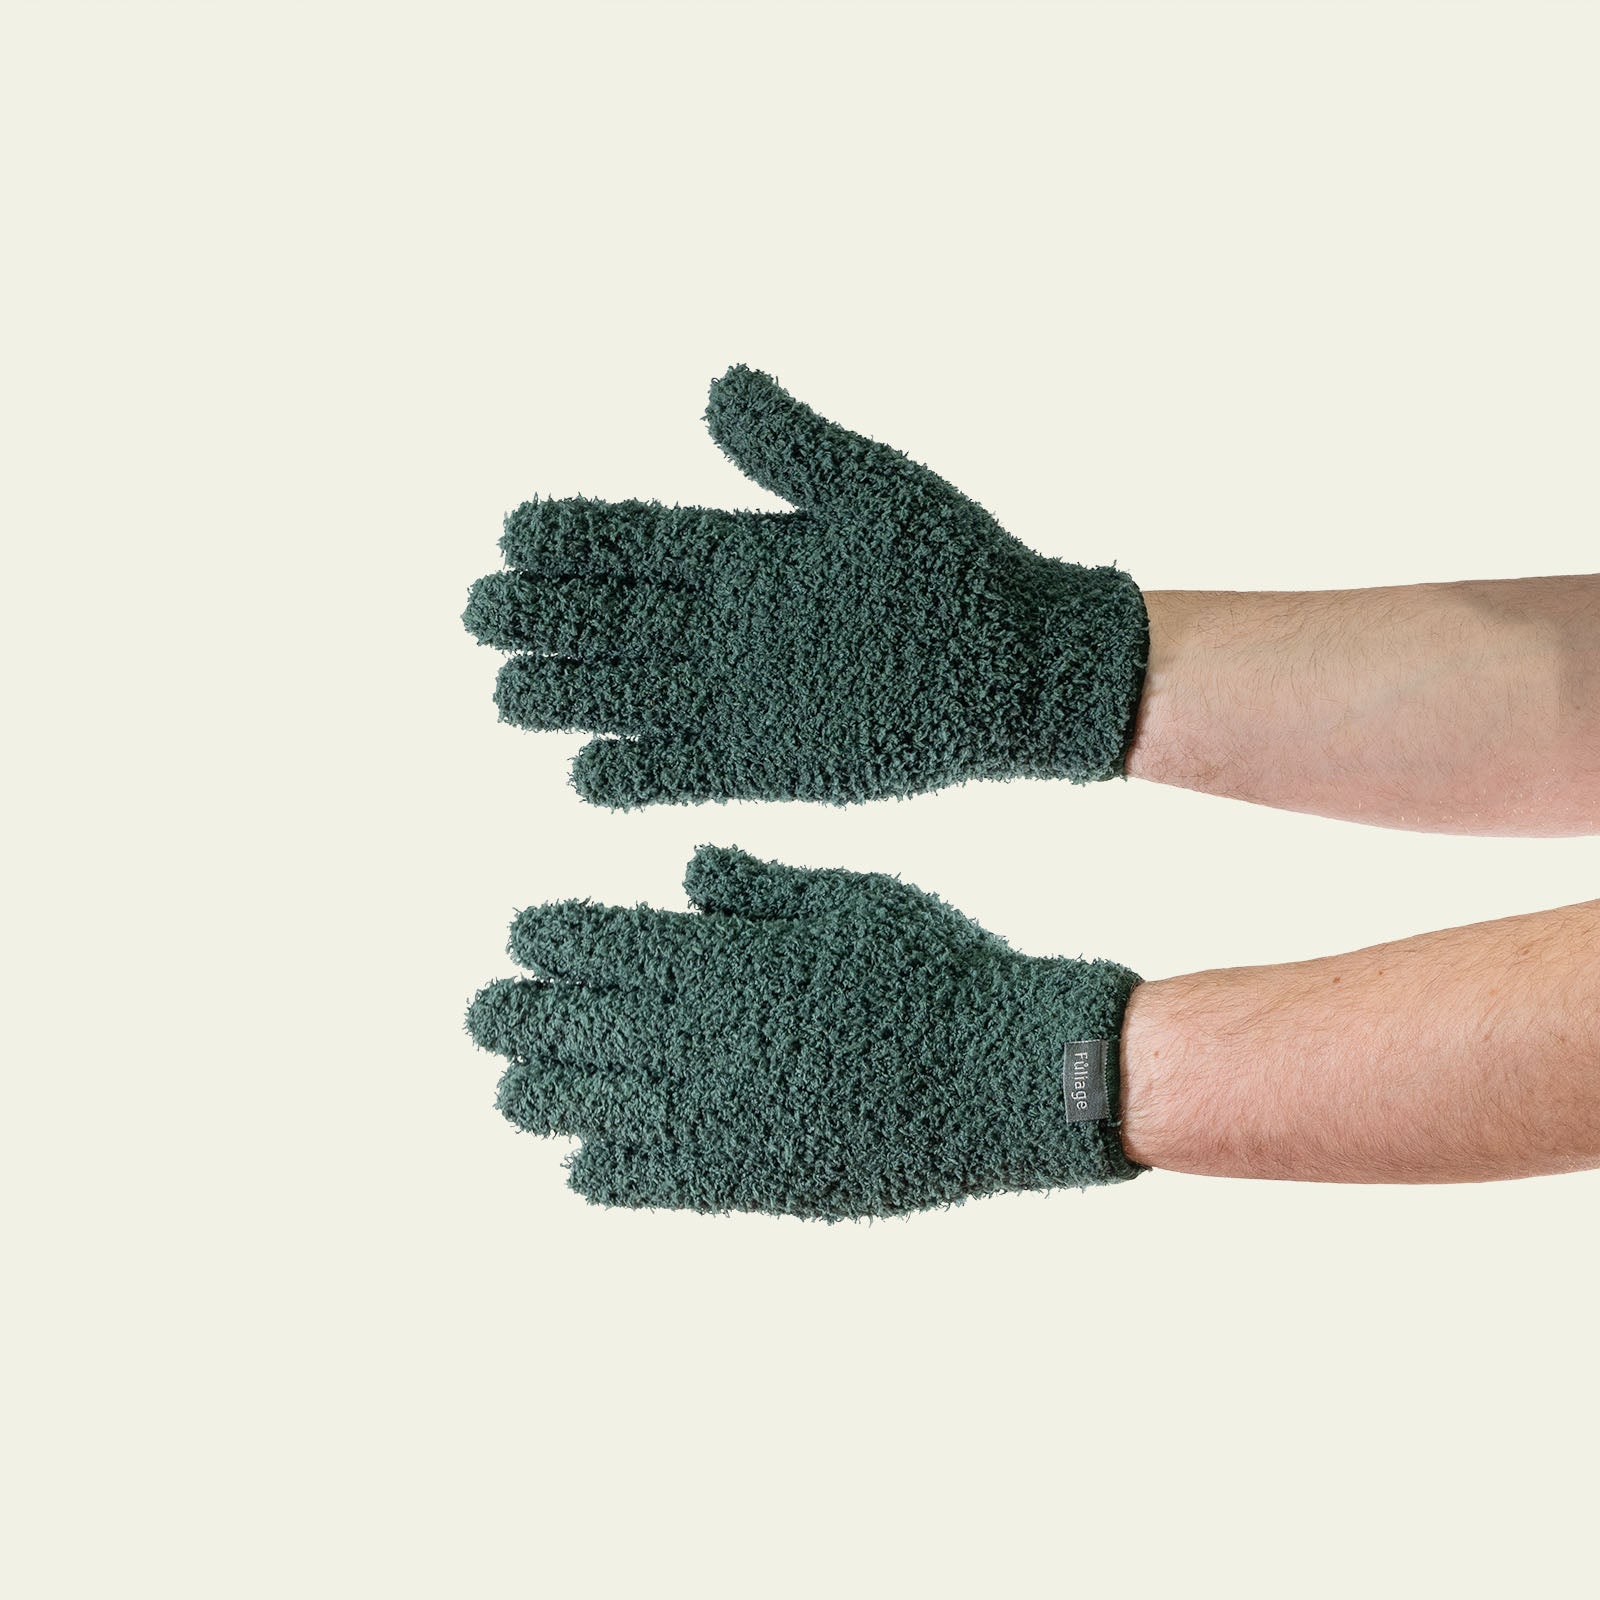 Fuliage | Microfiber Plant Dusting Gloves - Eco-Friendly and Effective Plant Care Solution